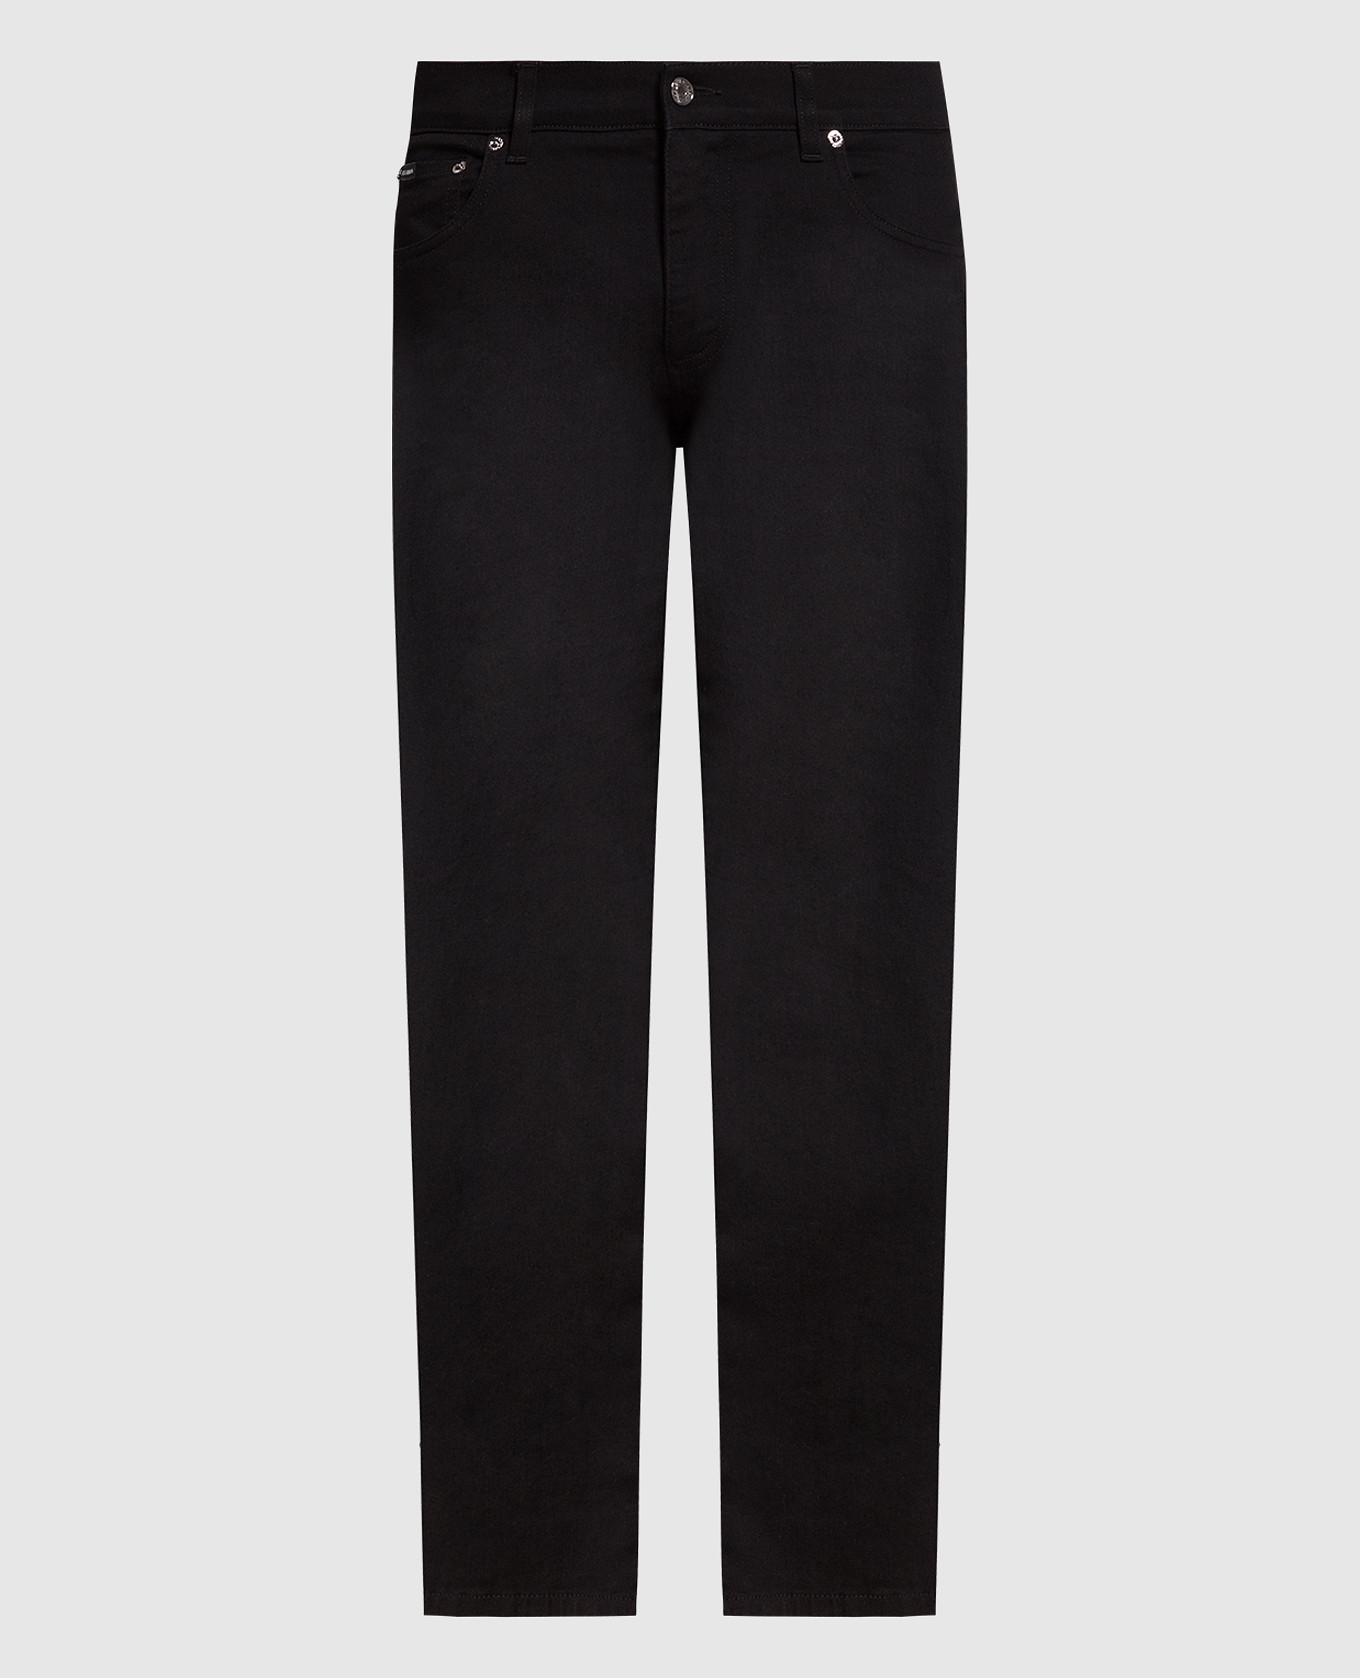 Black jeans with metallic logo patch